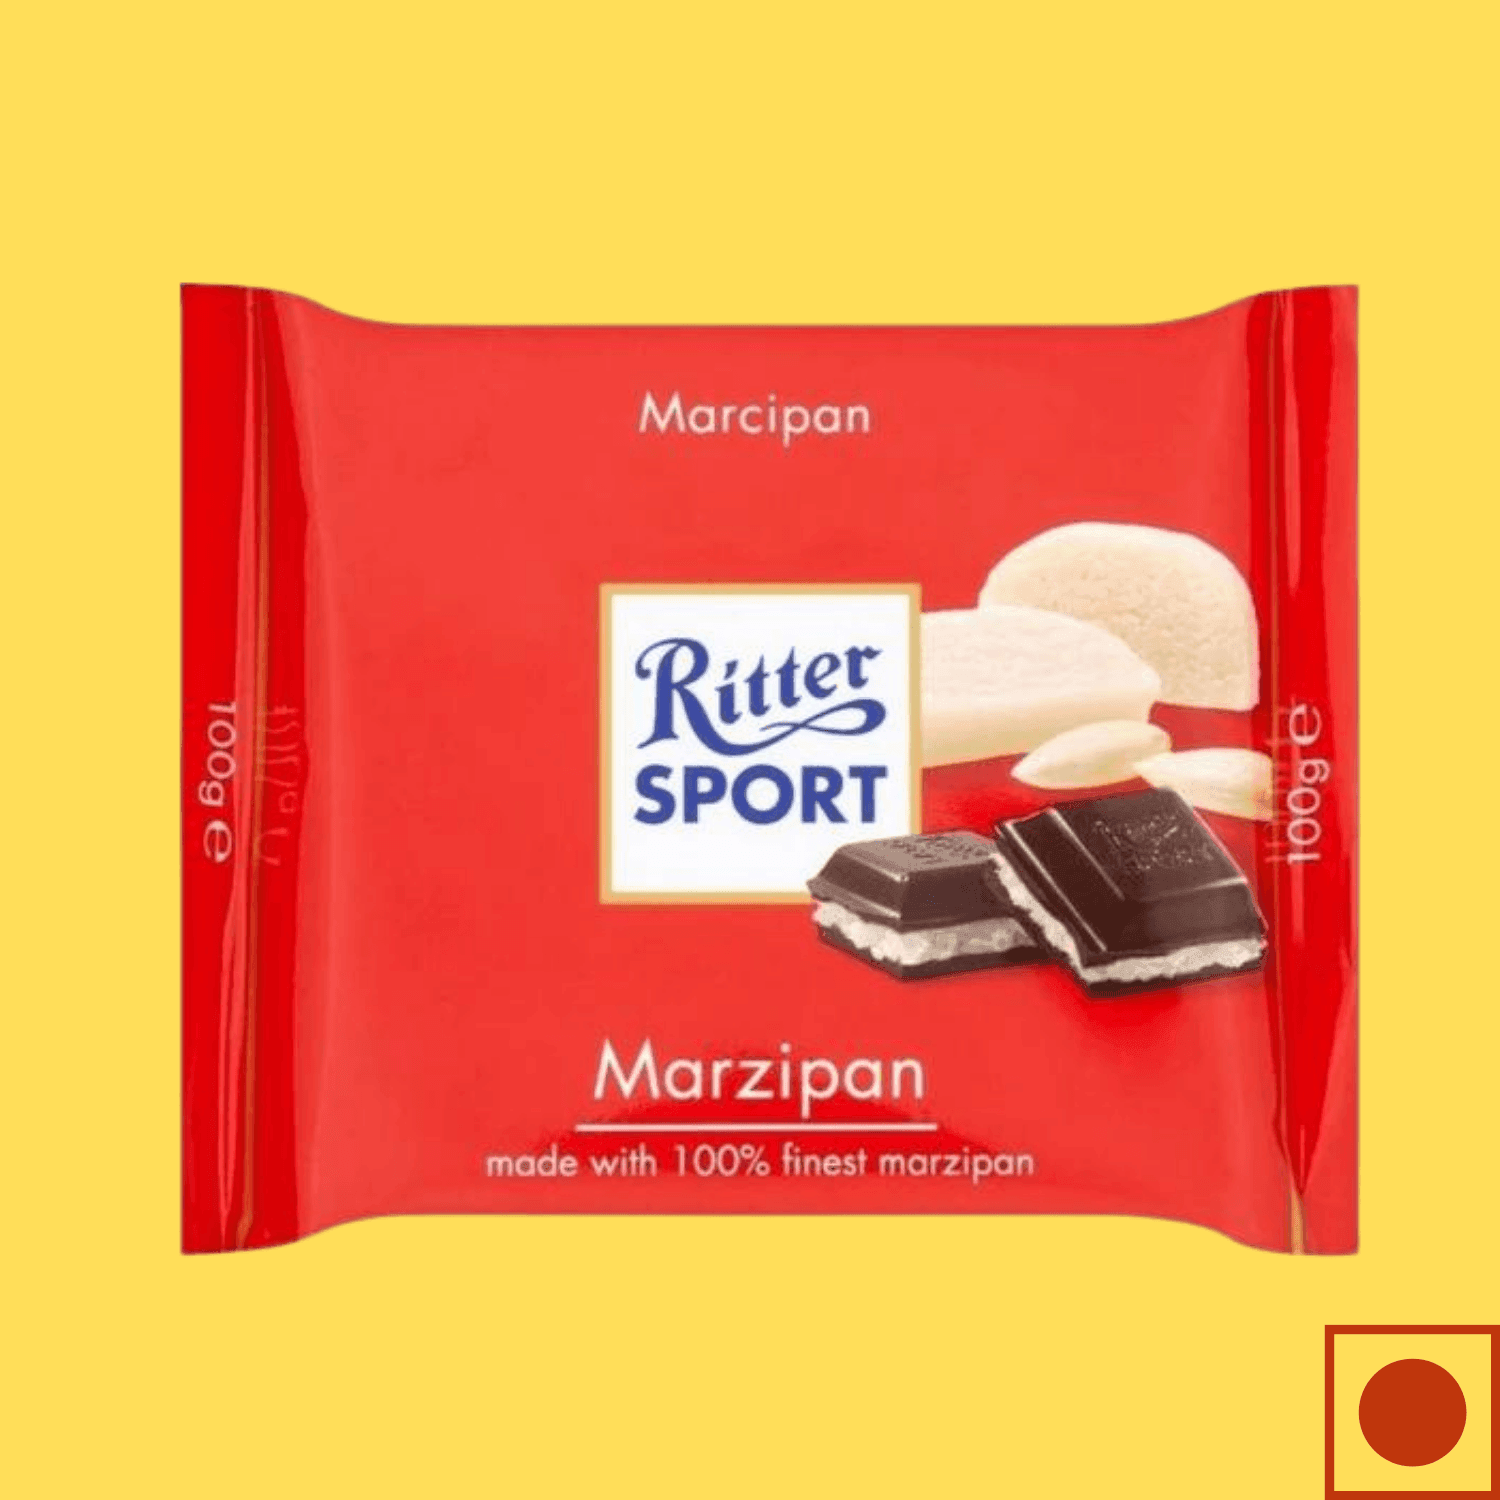 Ritter Sport Marzipan,100g (Imported) - Super 7 Mart